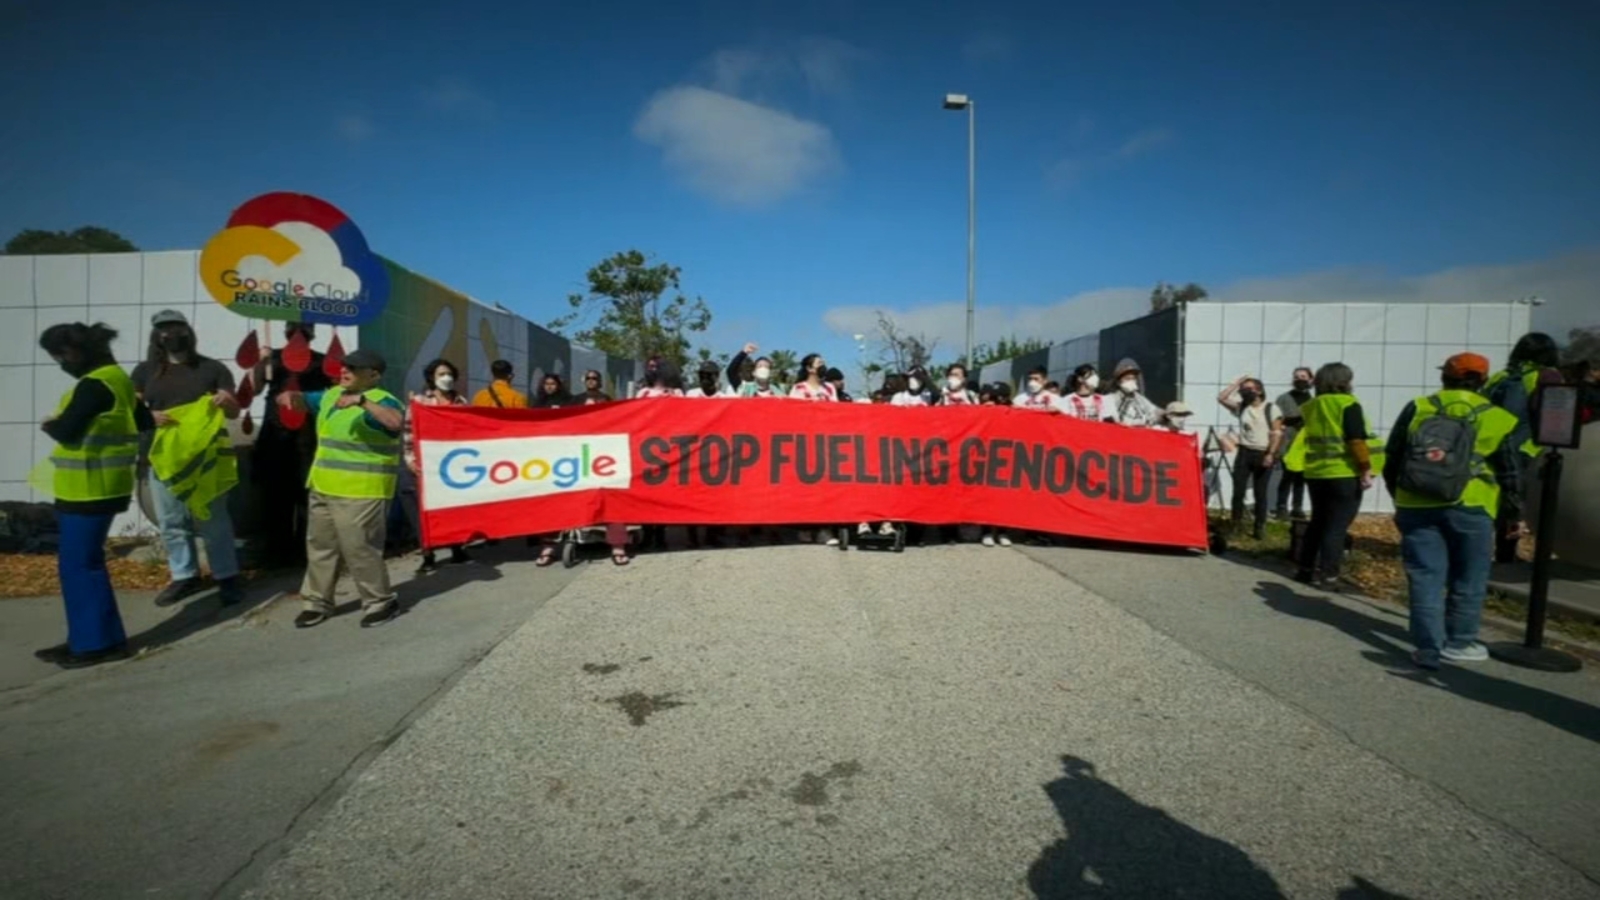 Israel-Hamas war: Pro-Palestinian protesters threaten to shut down Google developers conference in Mountain View [Video]